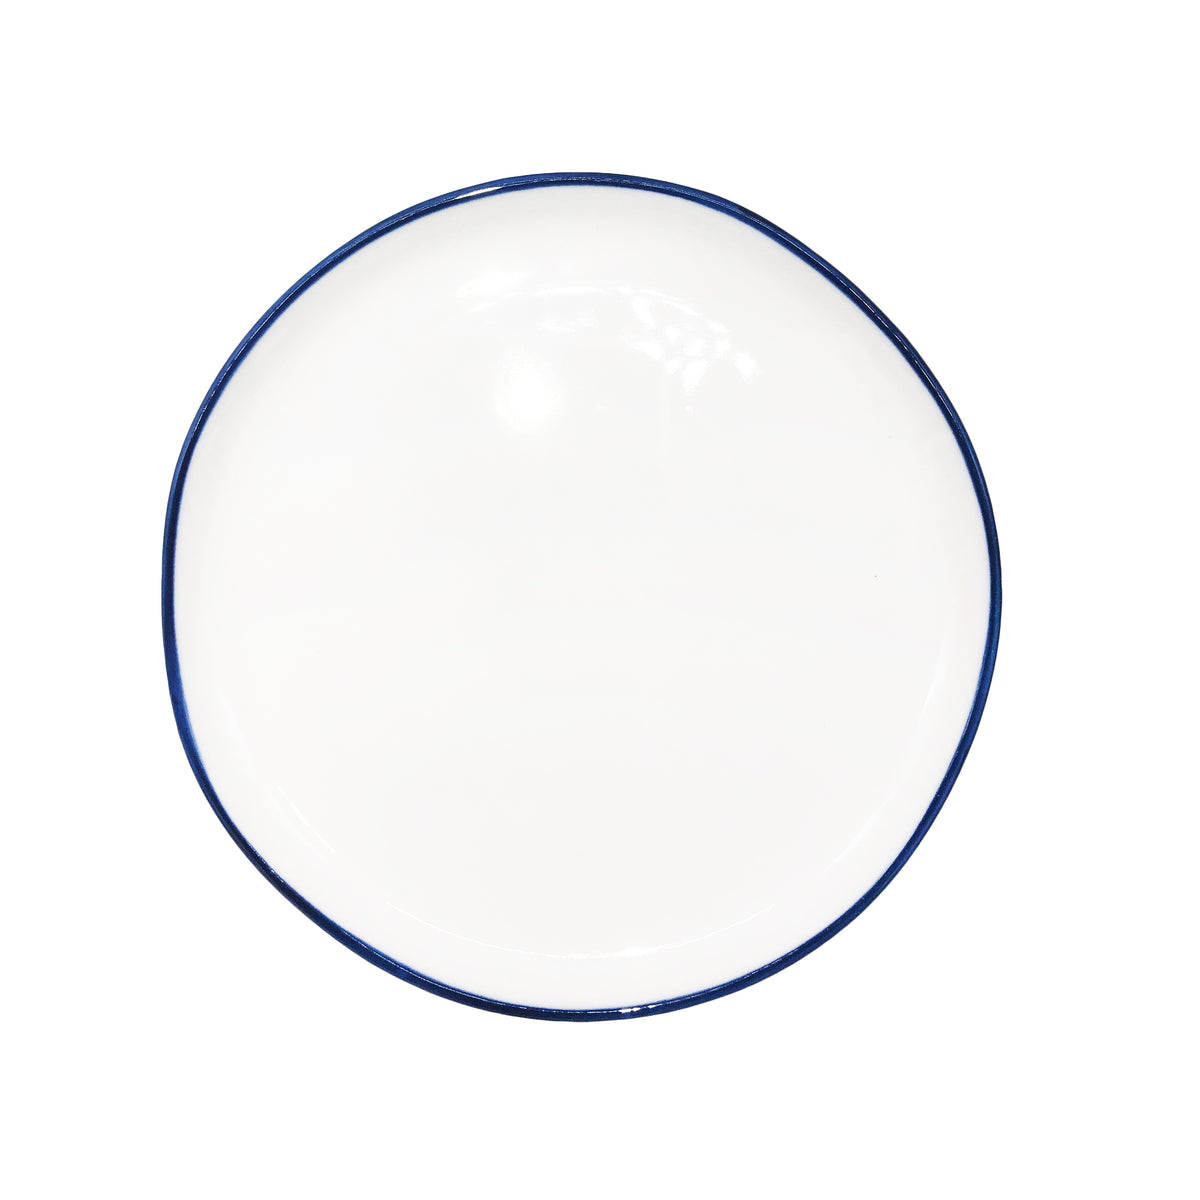 Abbesses Hand-Glazed, Porcelain Plate: White with Hand-Painted Blue Rim | Canvas Home - Set of 4